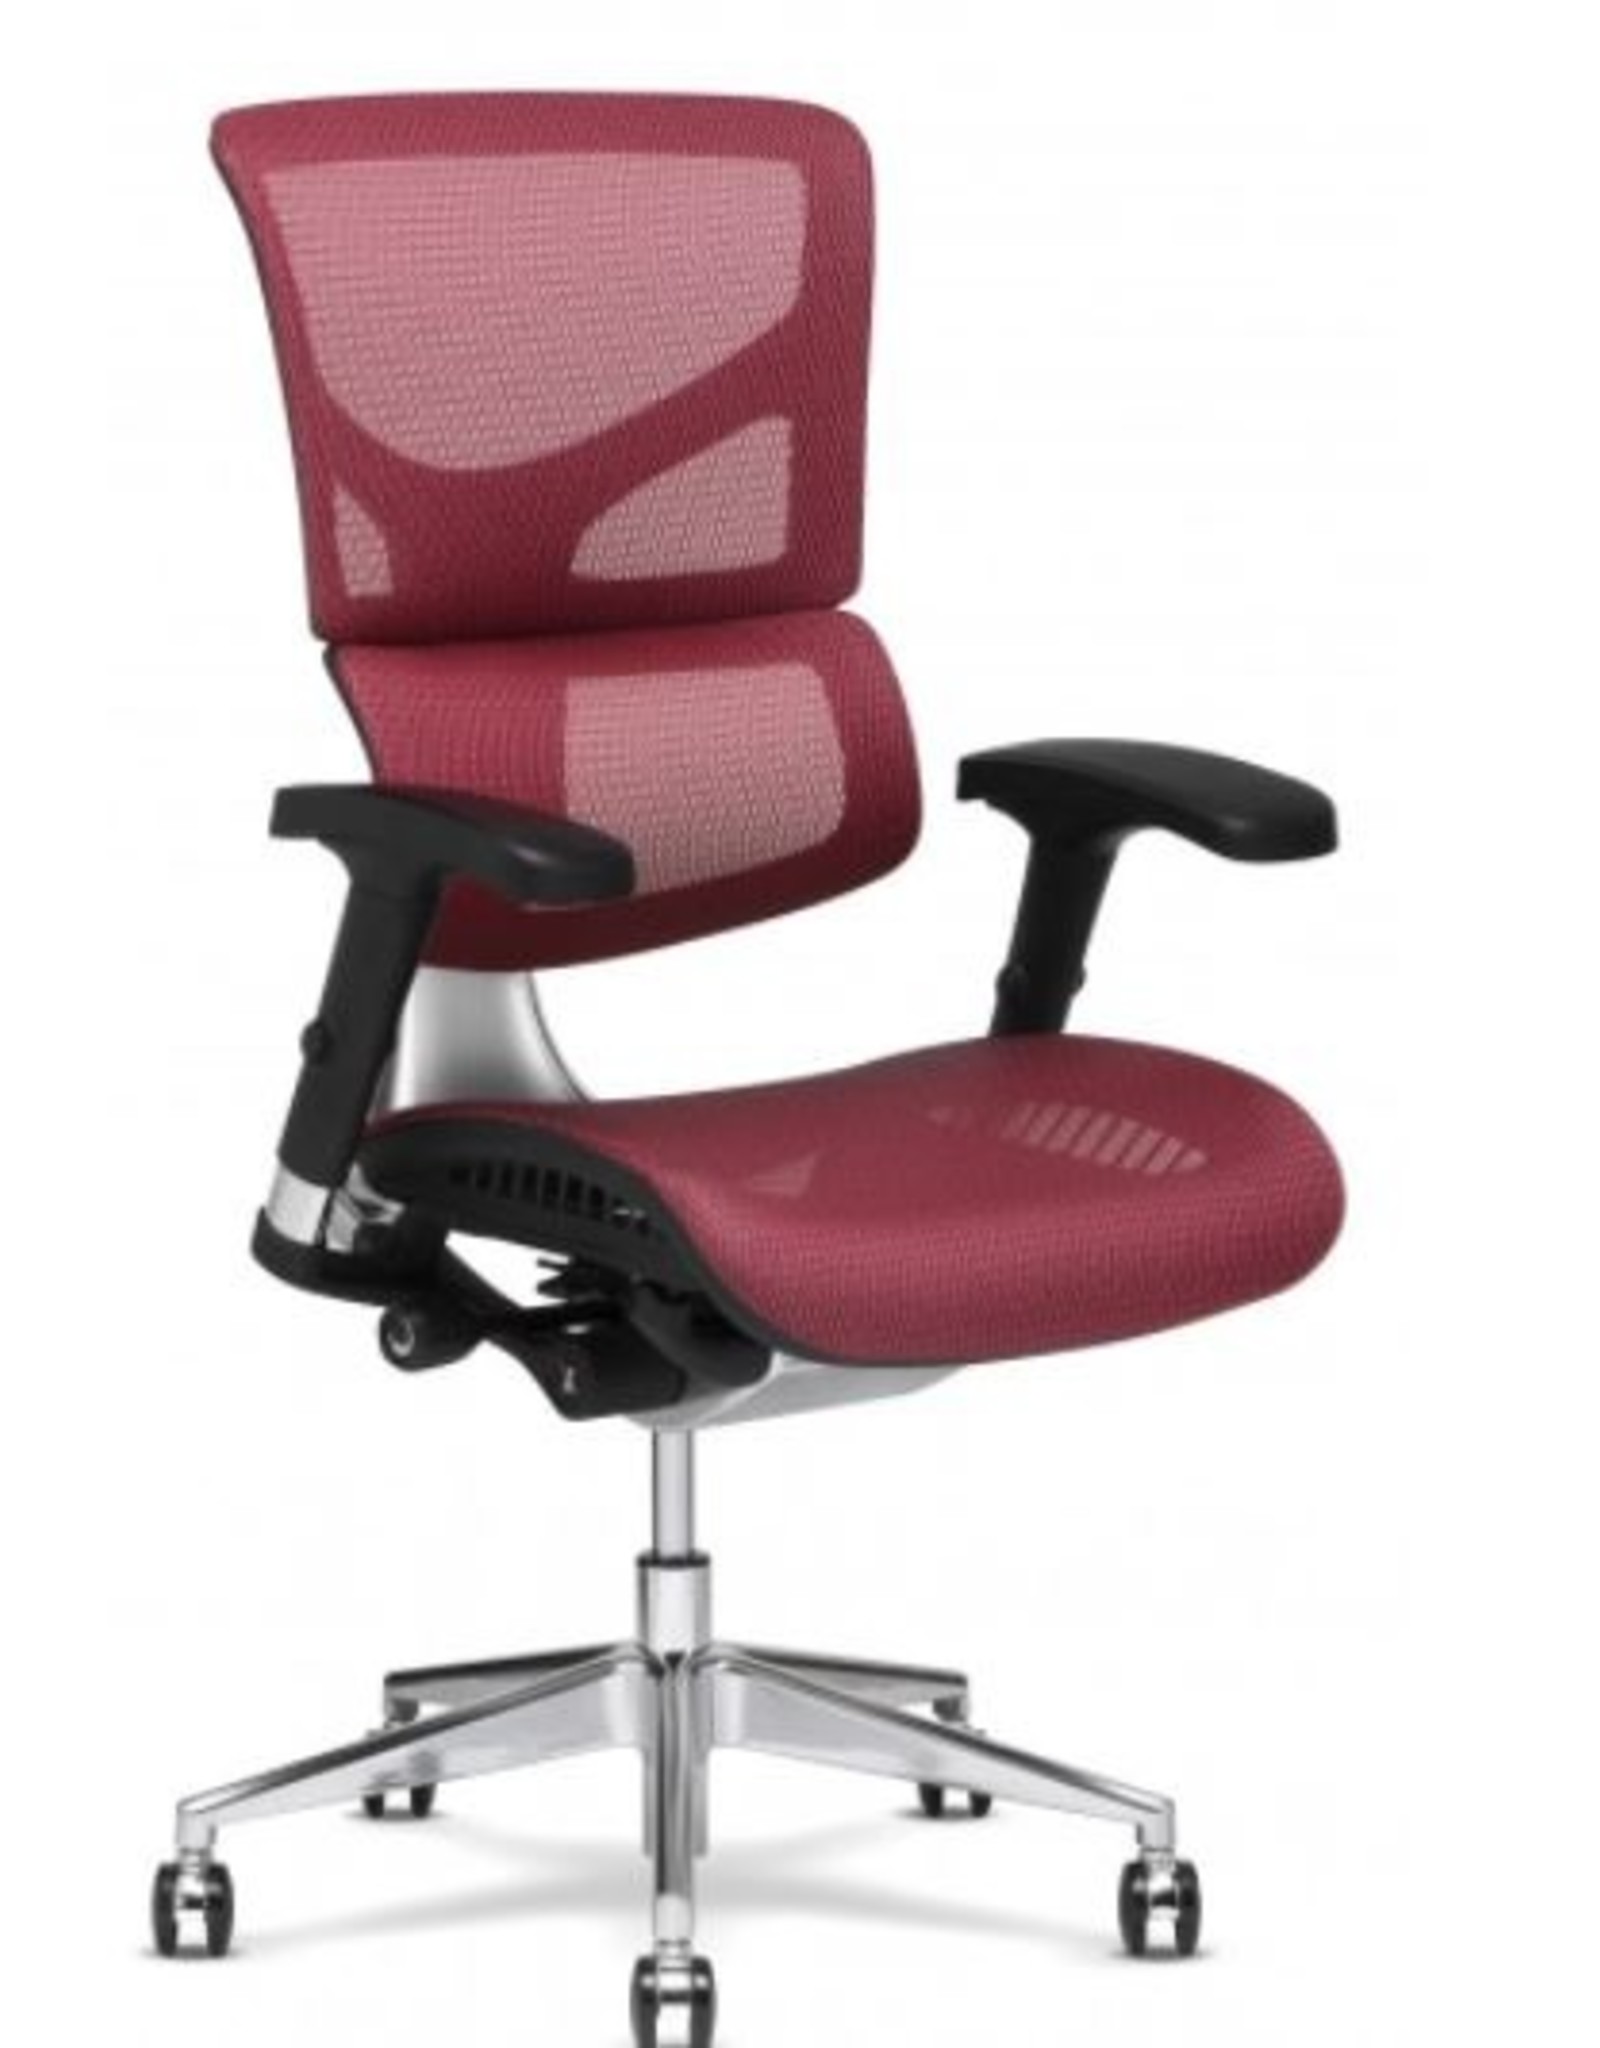 XCHAIR X2 Sport Managers Chair